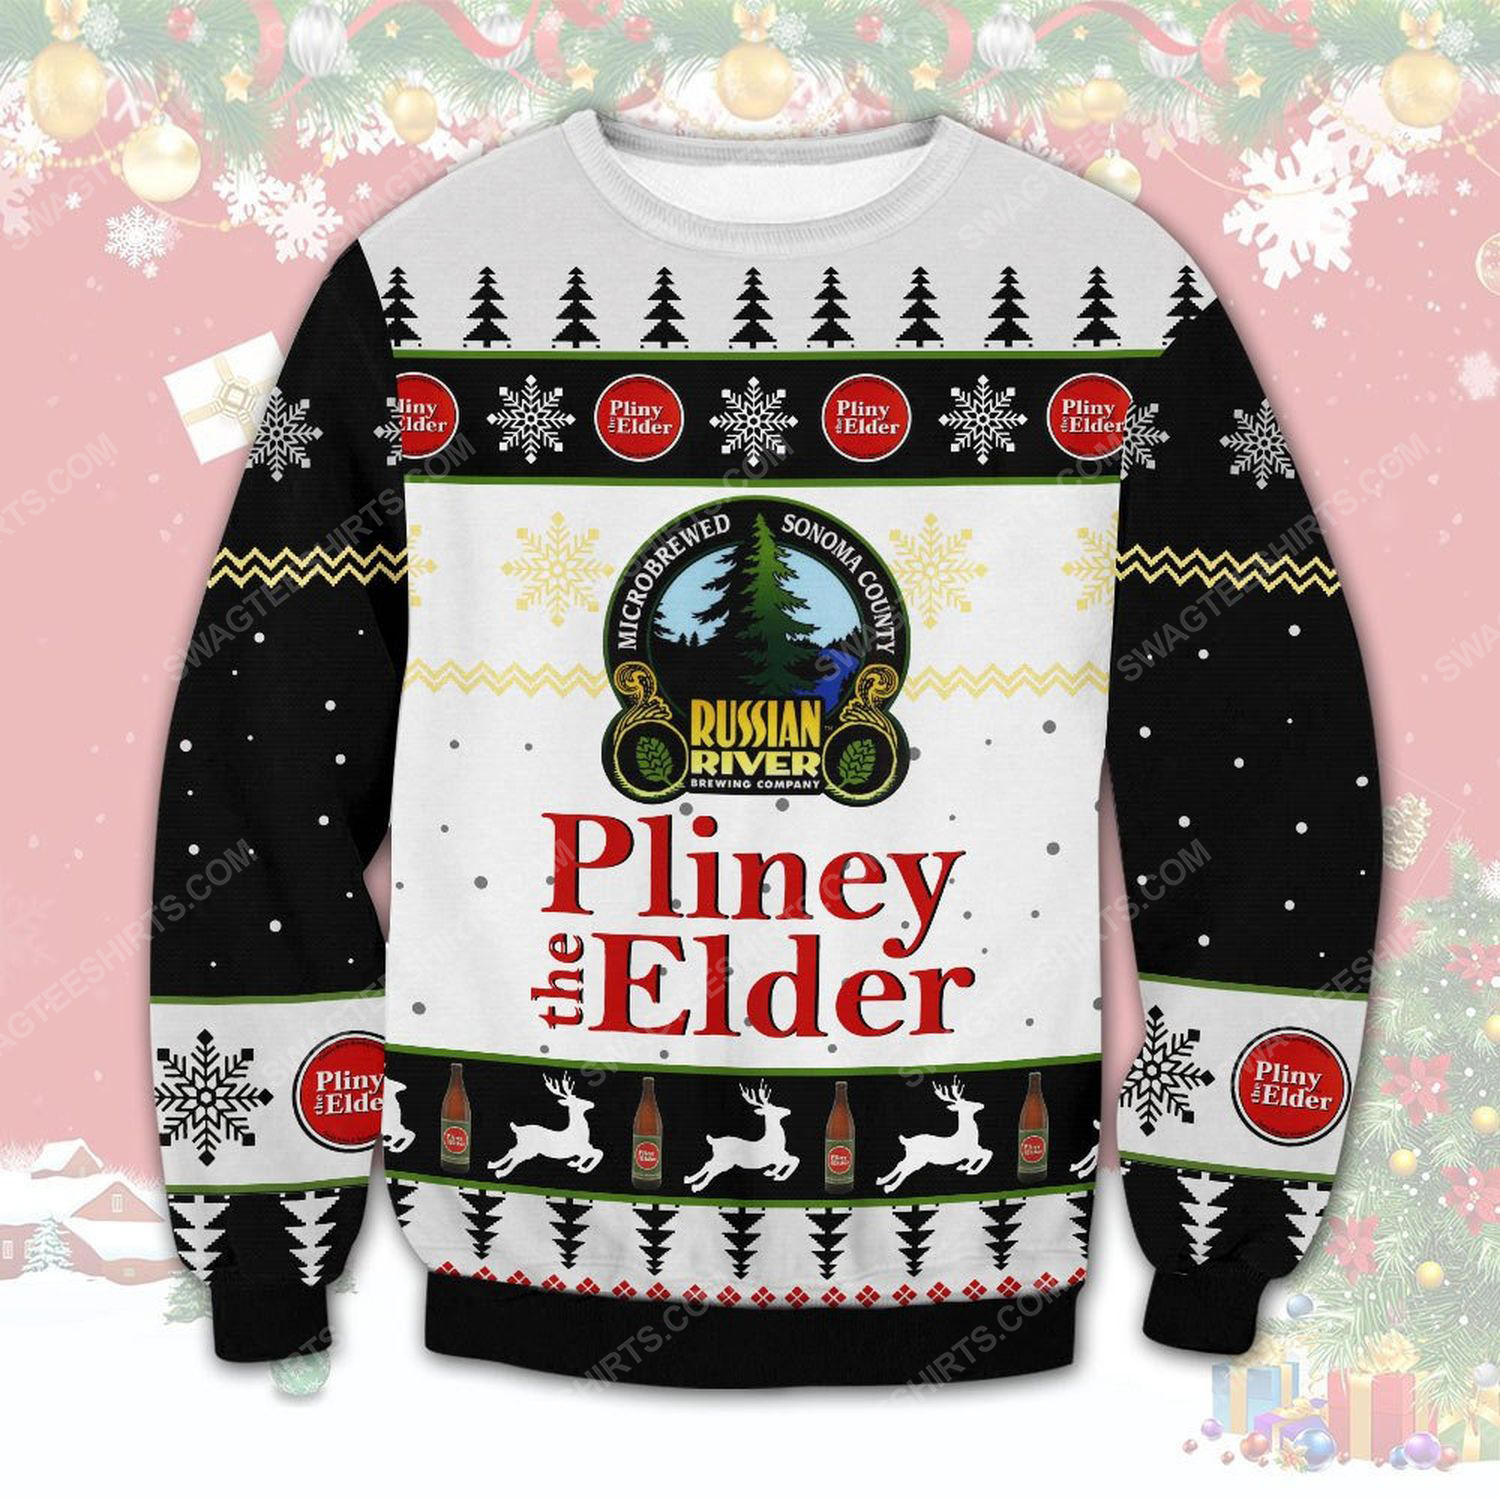 Pliny the elder russian river brewing company ugly christmas sweater 1 - Copy (2)